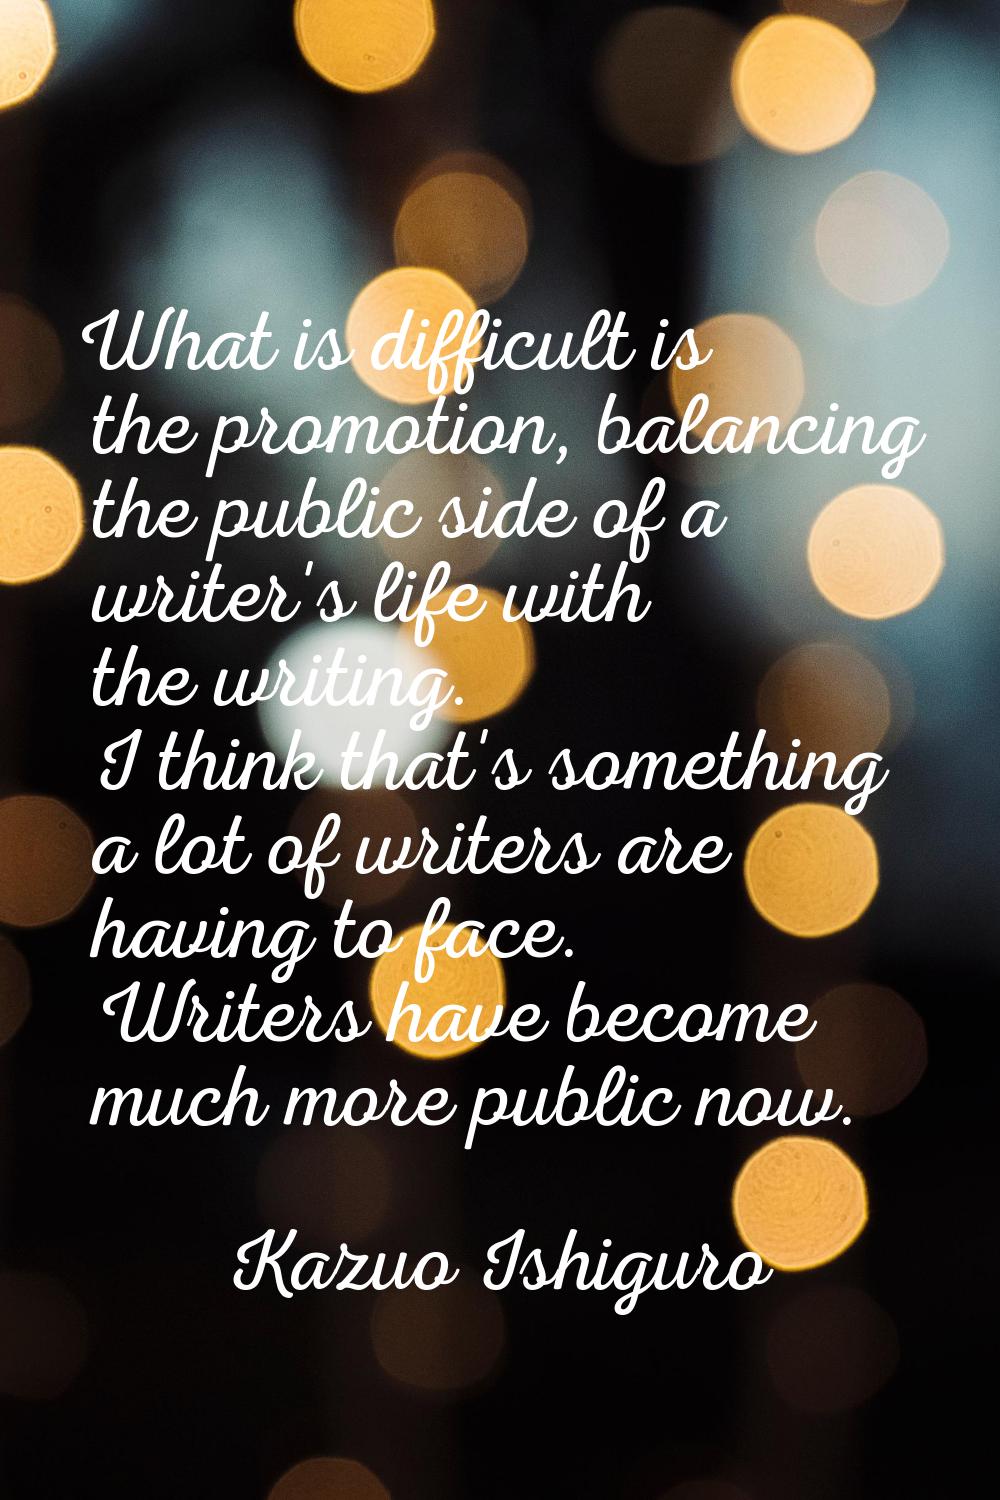 What is difficult is the promotion, balancing the public side of a writer's life with the writing. 